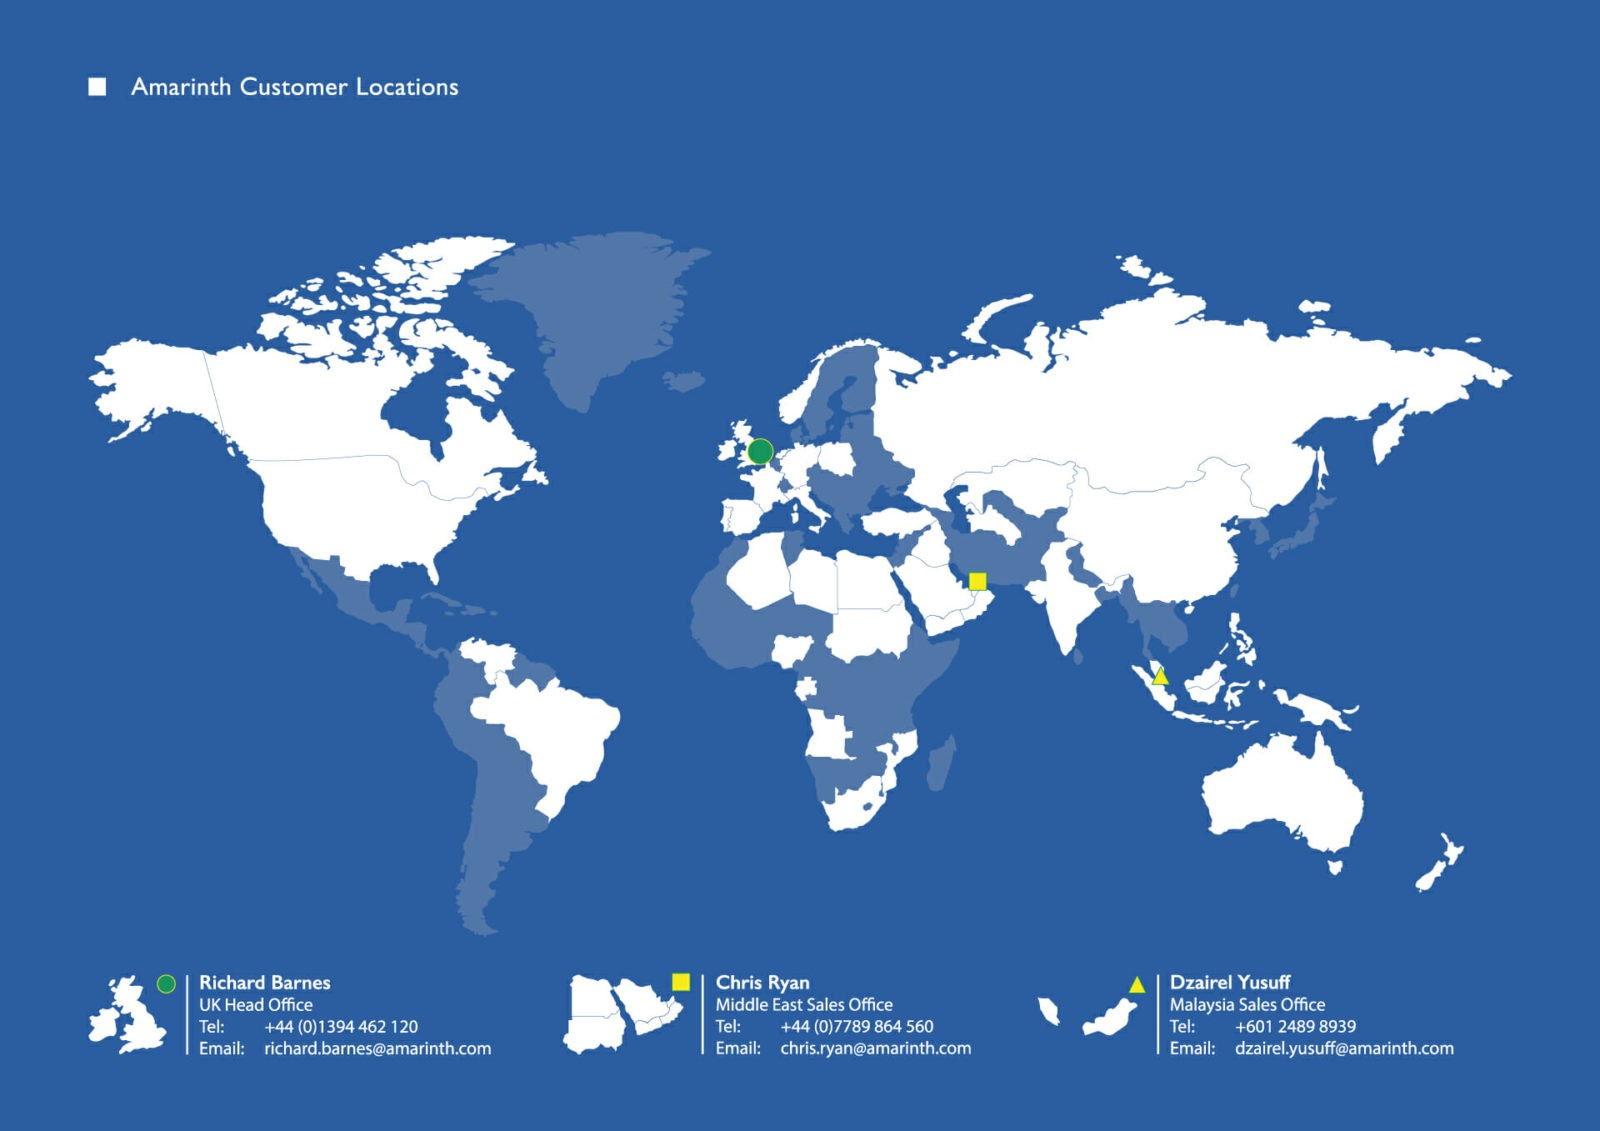 World locations of Amarinth manufacturing operations and clients